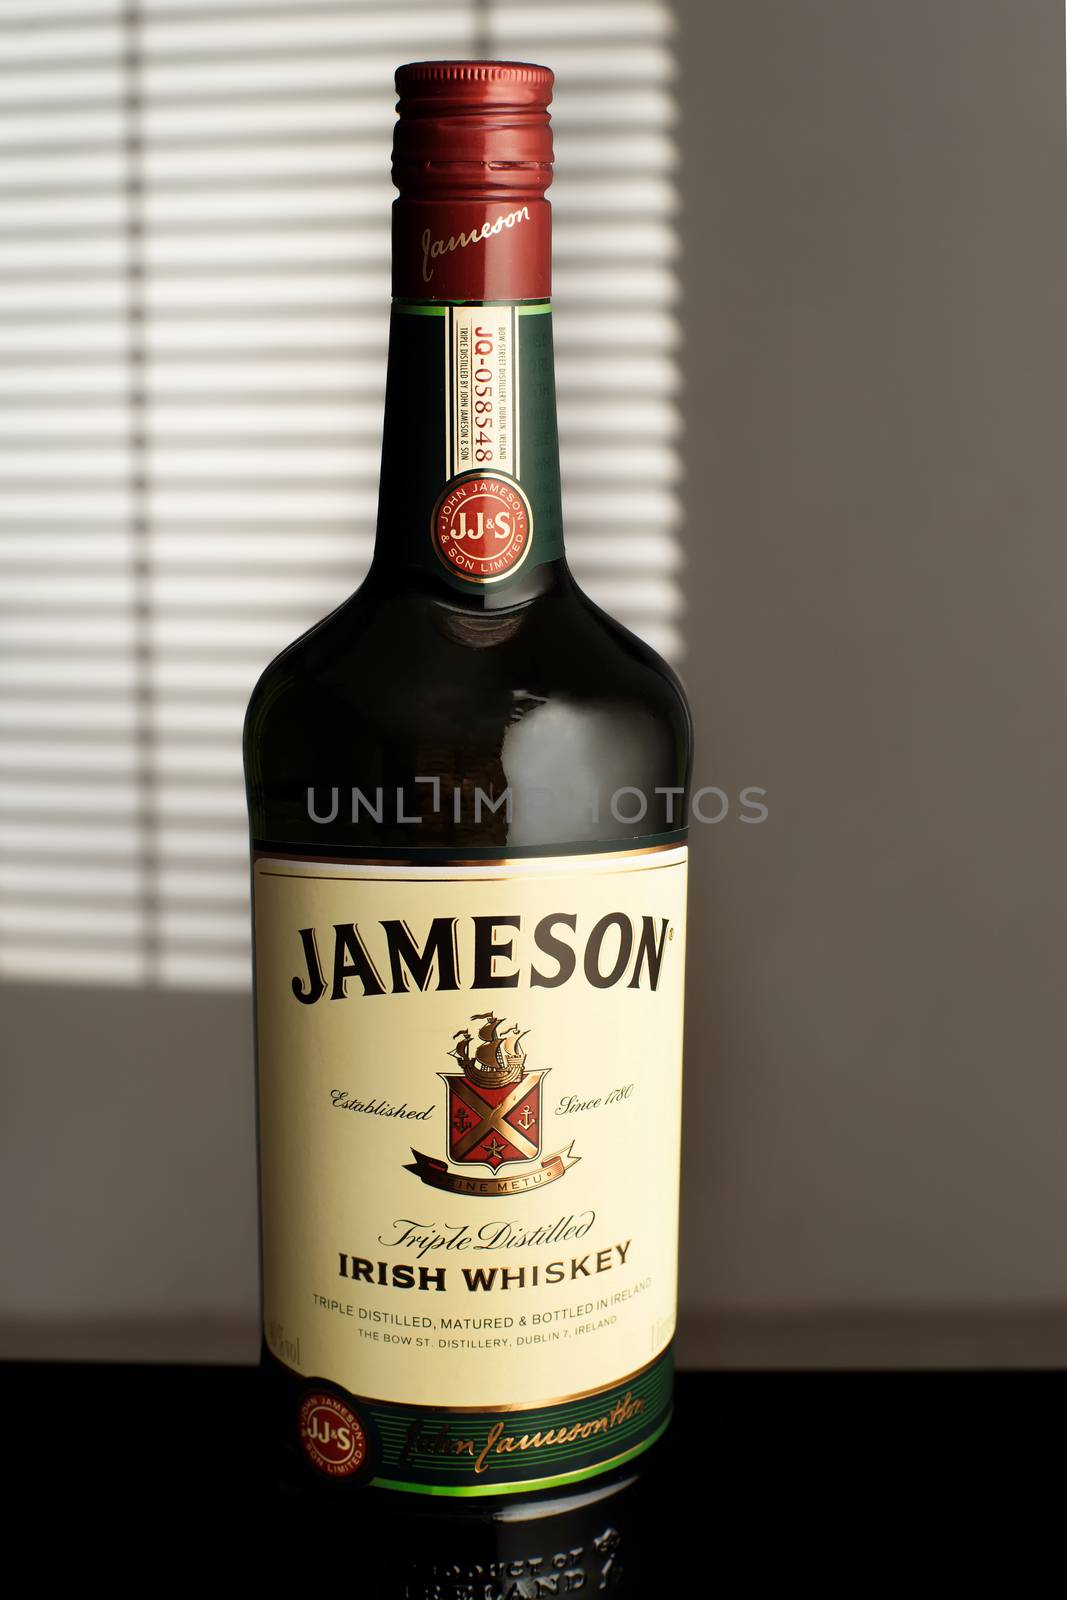 MINSK, BELARUS-AUGUST 25, 2016. A bottle of Irish whiskey "Jameson" is on the table  by vmytra